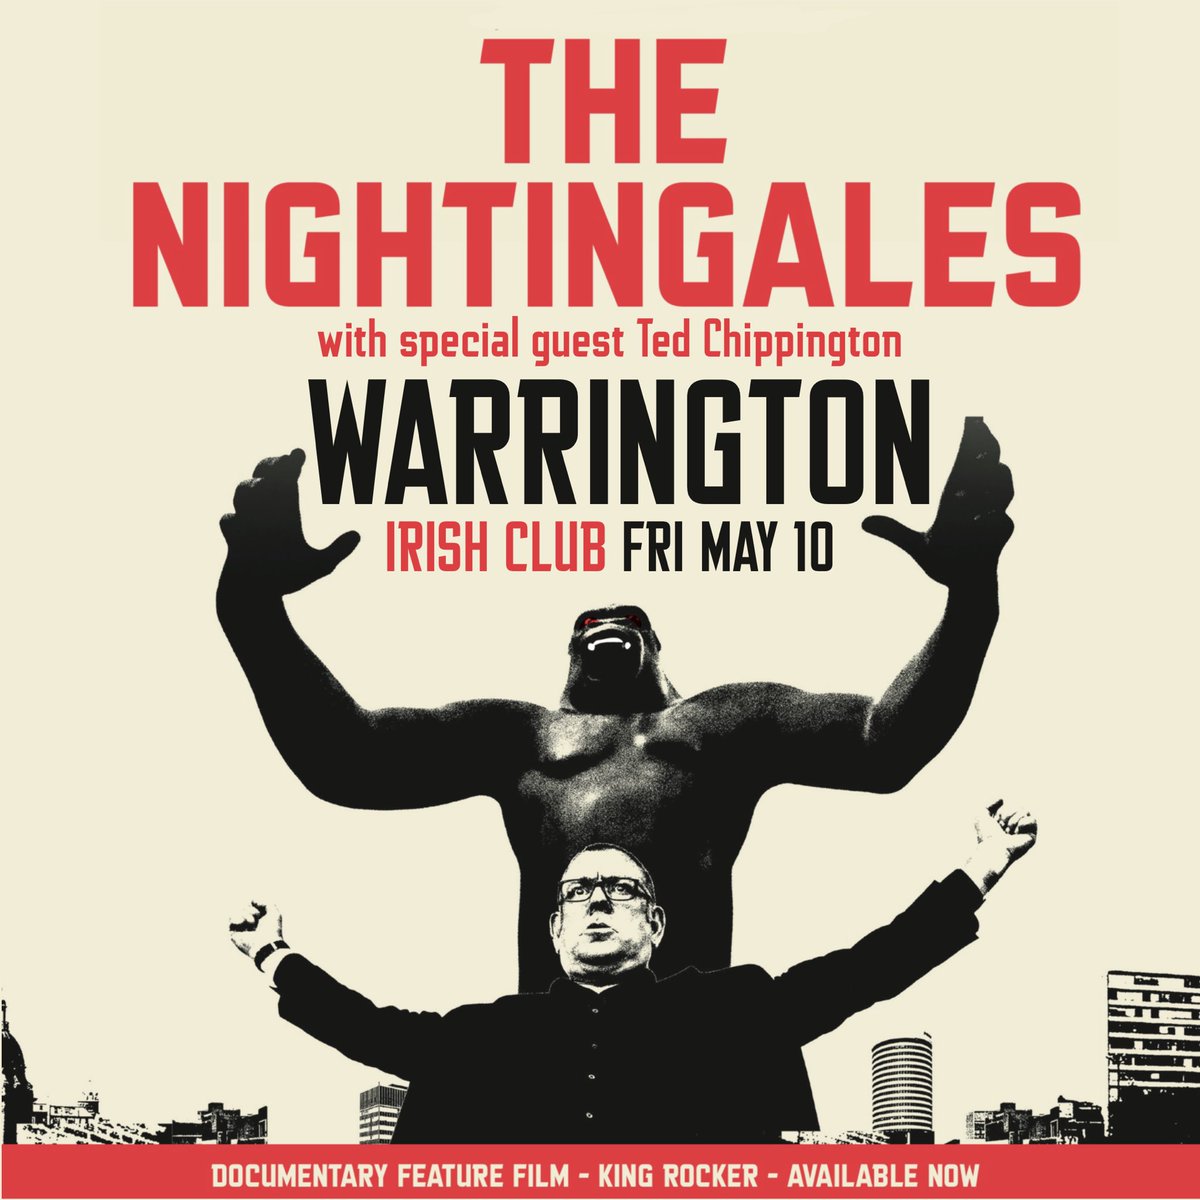 Oi oi WARRINGTON! Closest we’ll be getting to Manchester this year, hop on a train why doncha?? Friday night at the Irish Club with Ted Chippington, what’s not to love? Get ‘em in pronto skiddle.com/whats-on/Warri…